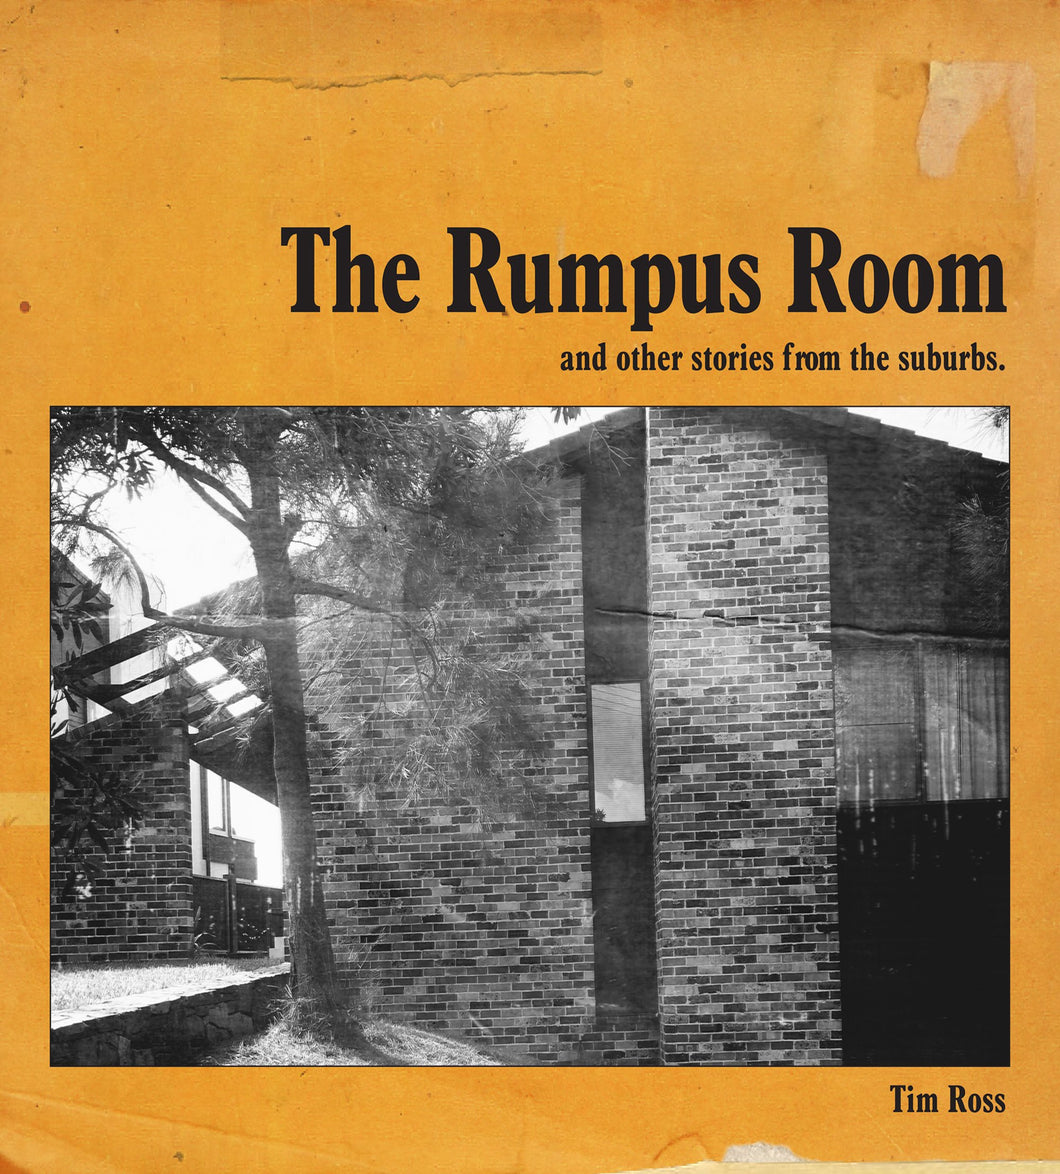 The Rumpus Room by Tim Ross